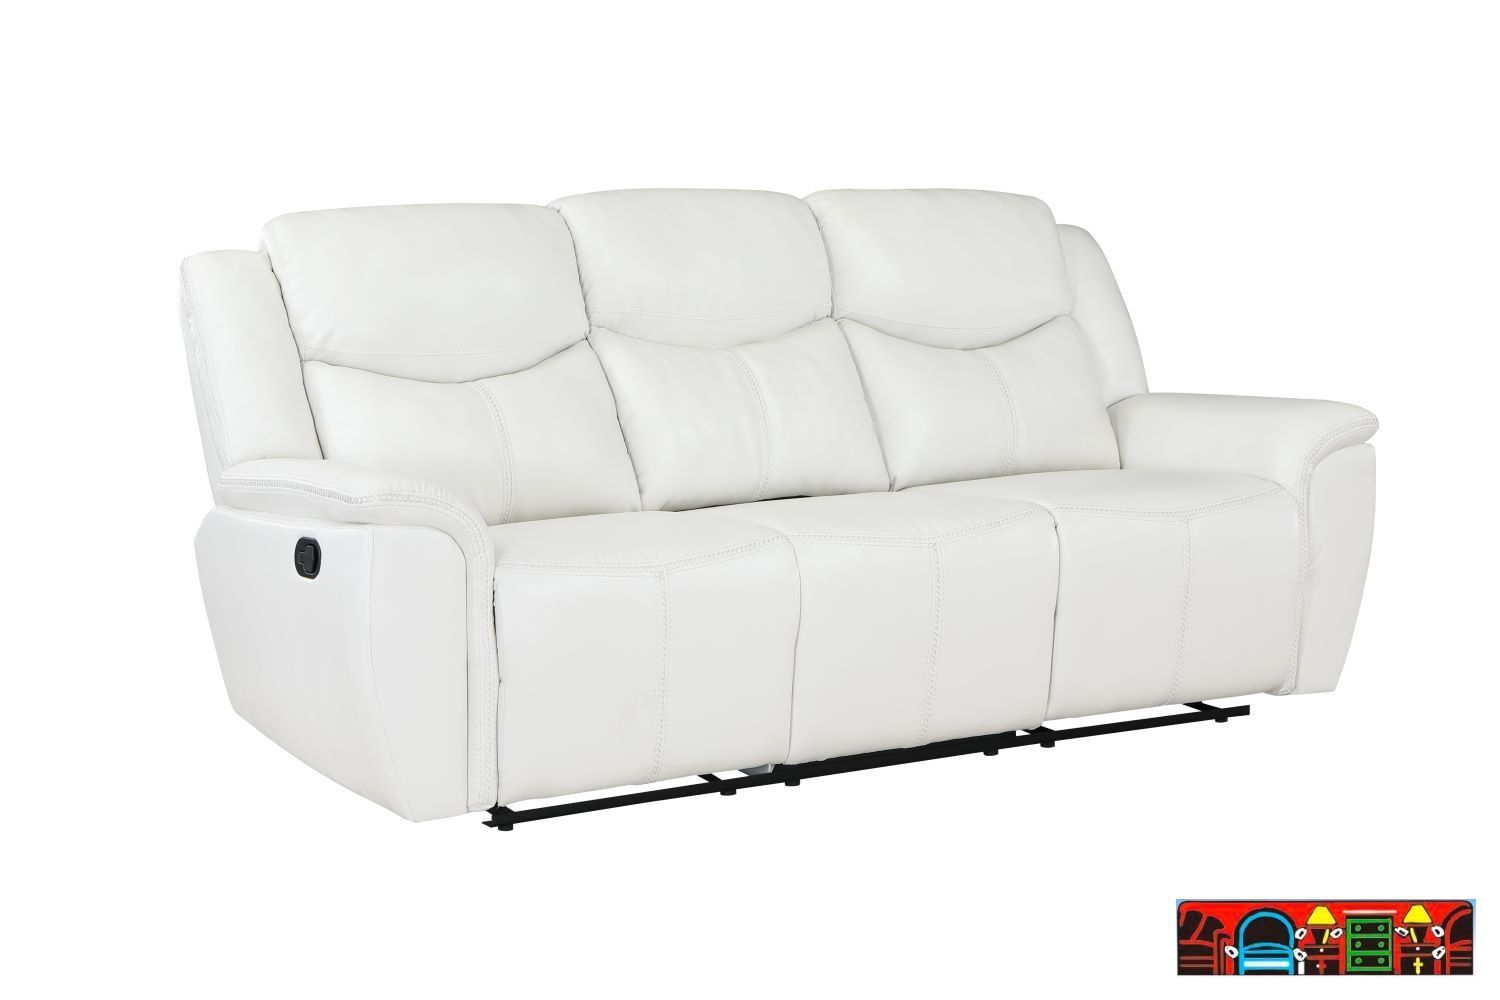 New Eric leather double reclining sofa, in white.